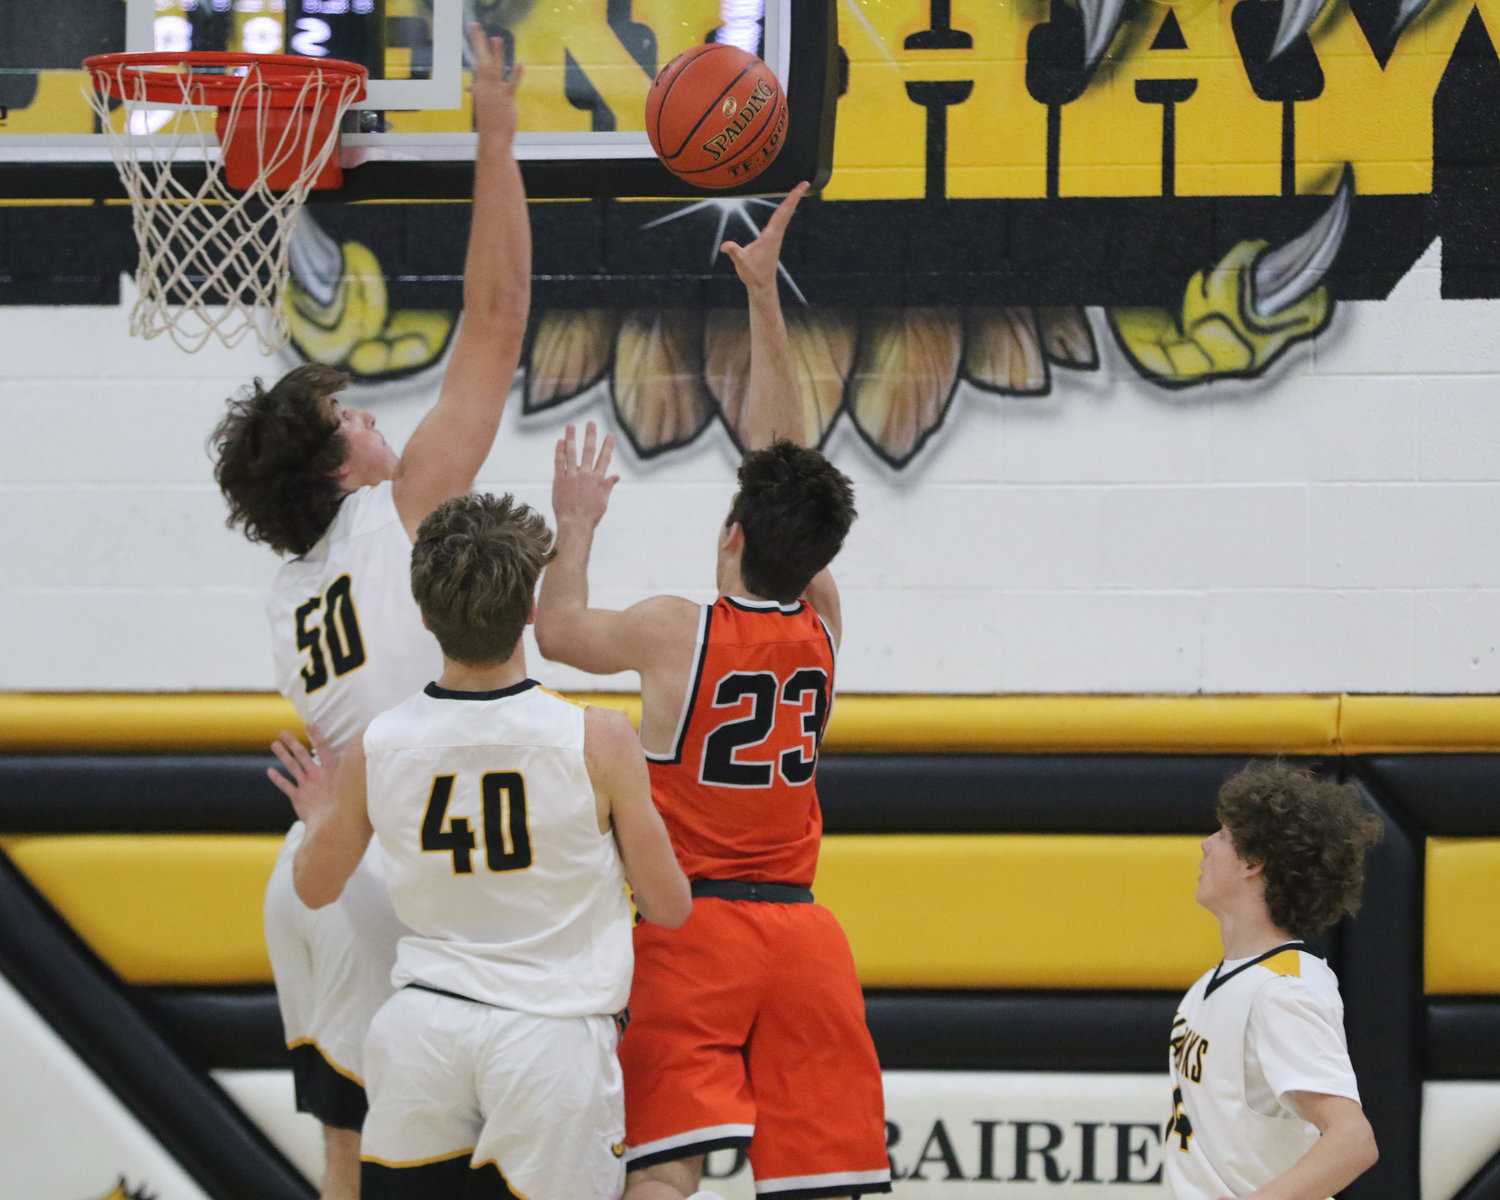 Aidan Rath blocks a shot during the first quarter of a scrimmage with Mediapolis in Wellman on Saturday, November 21.